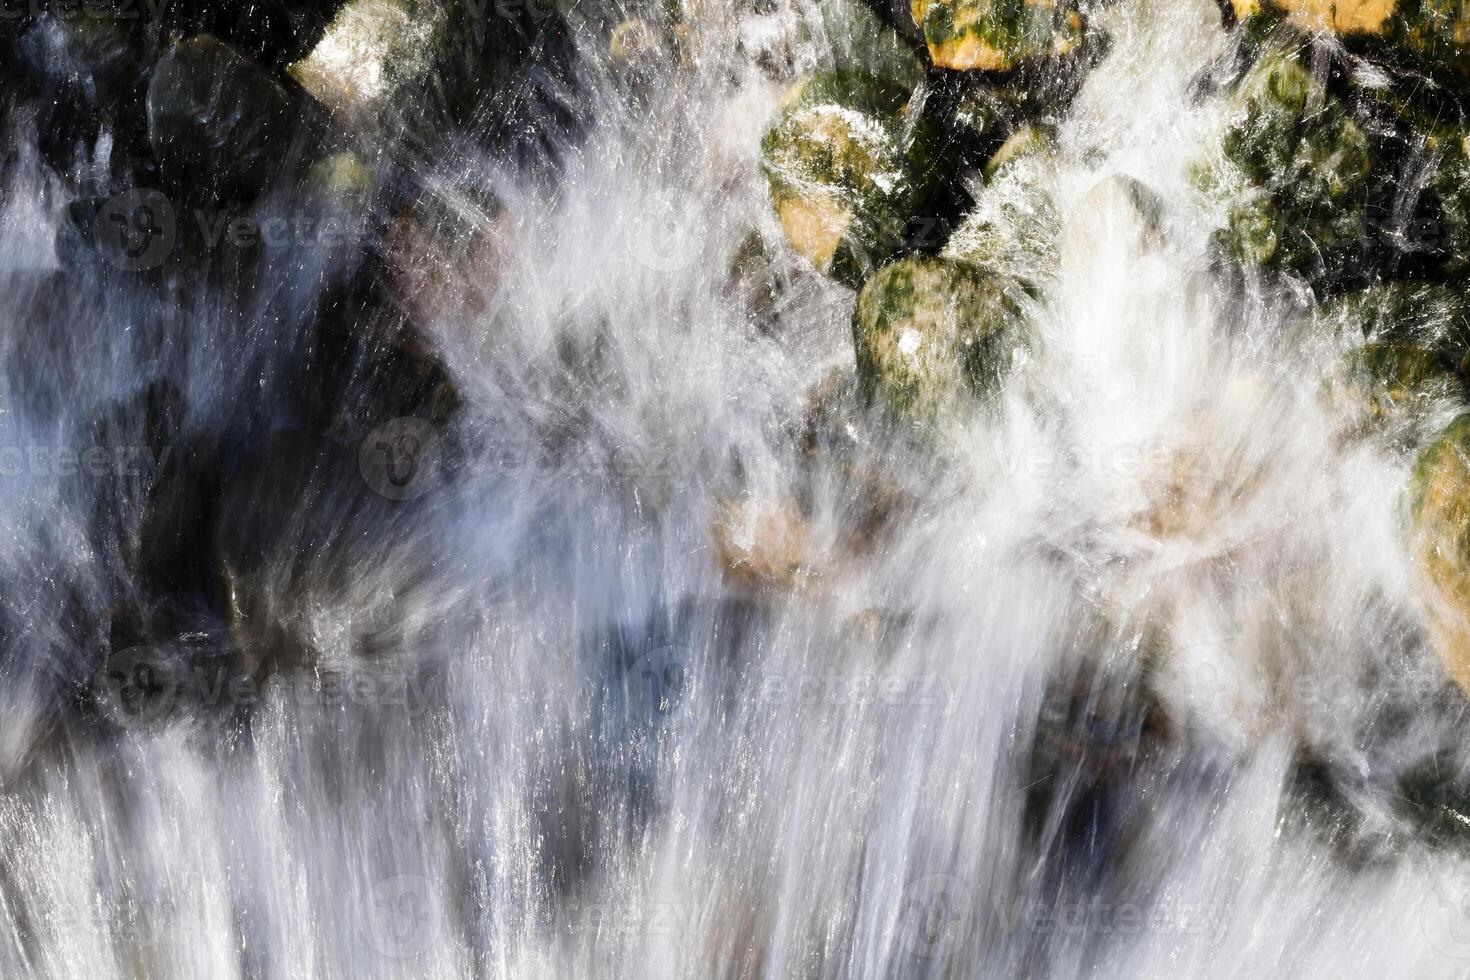 Water Stream Spraying Over Moss Covered Rocks photo